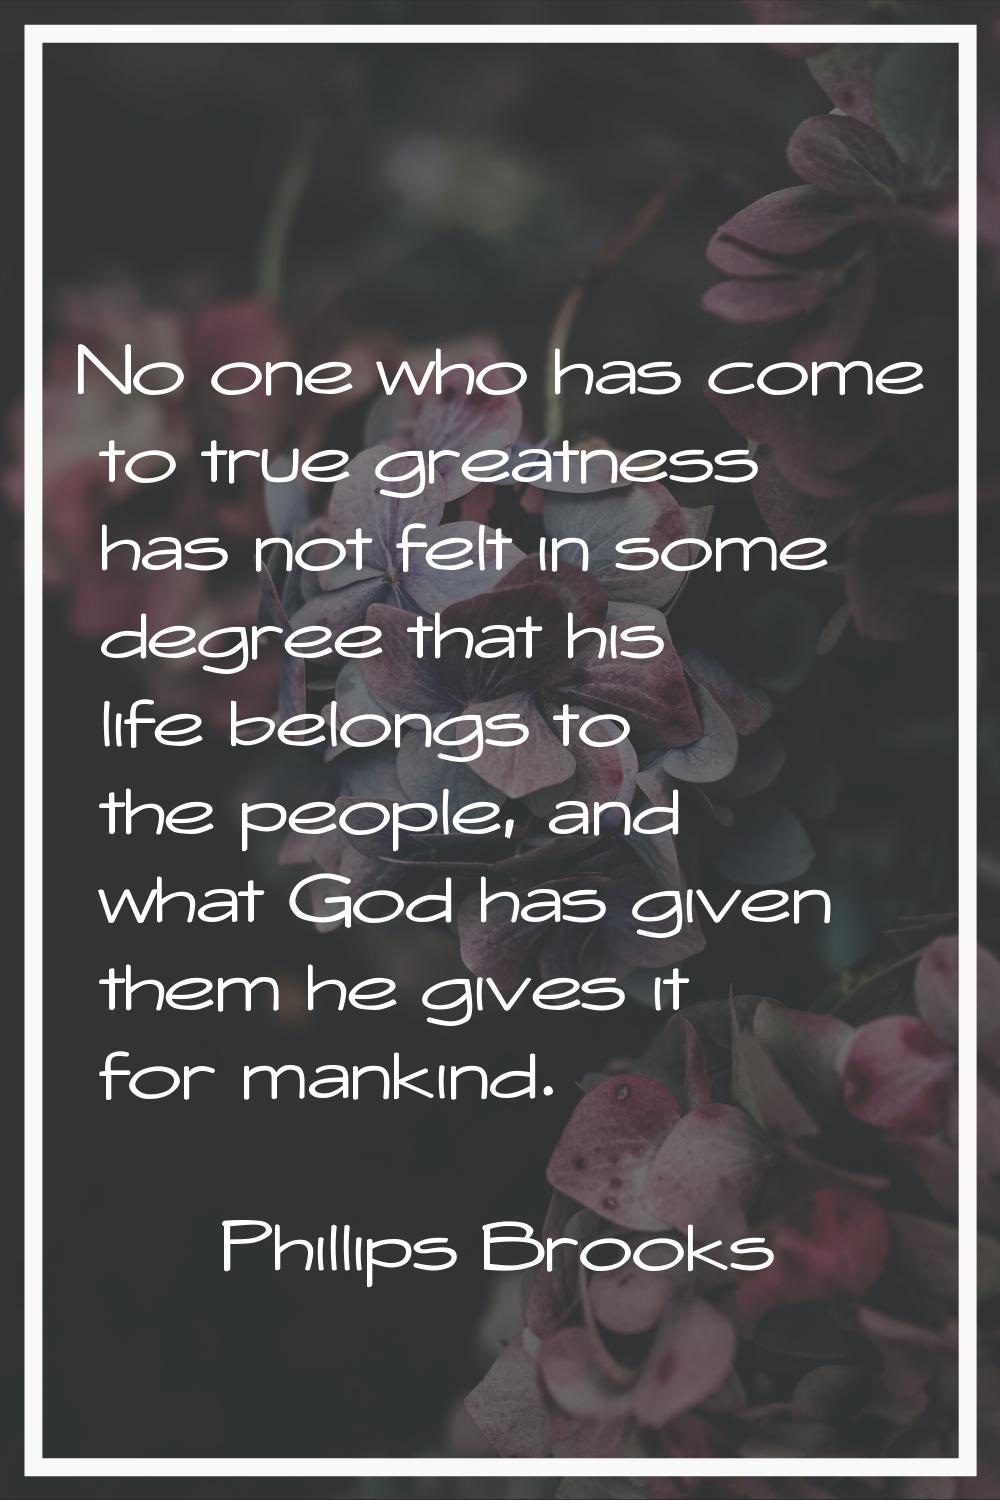 No one who has come to true greatness has not felt in some degree that his life belongs to the peop